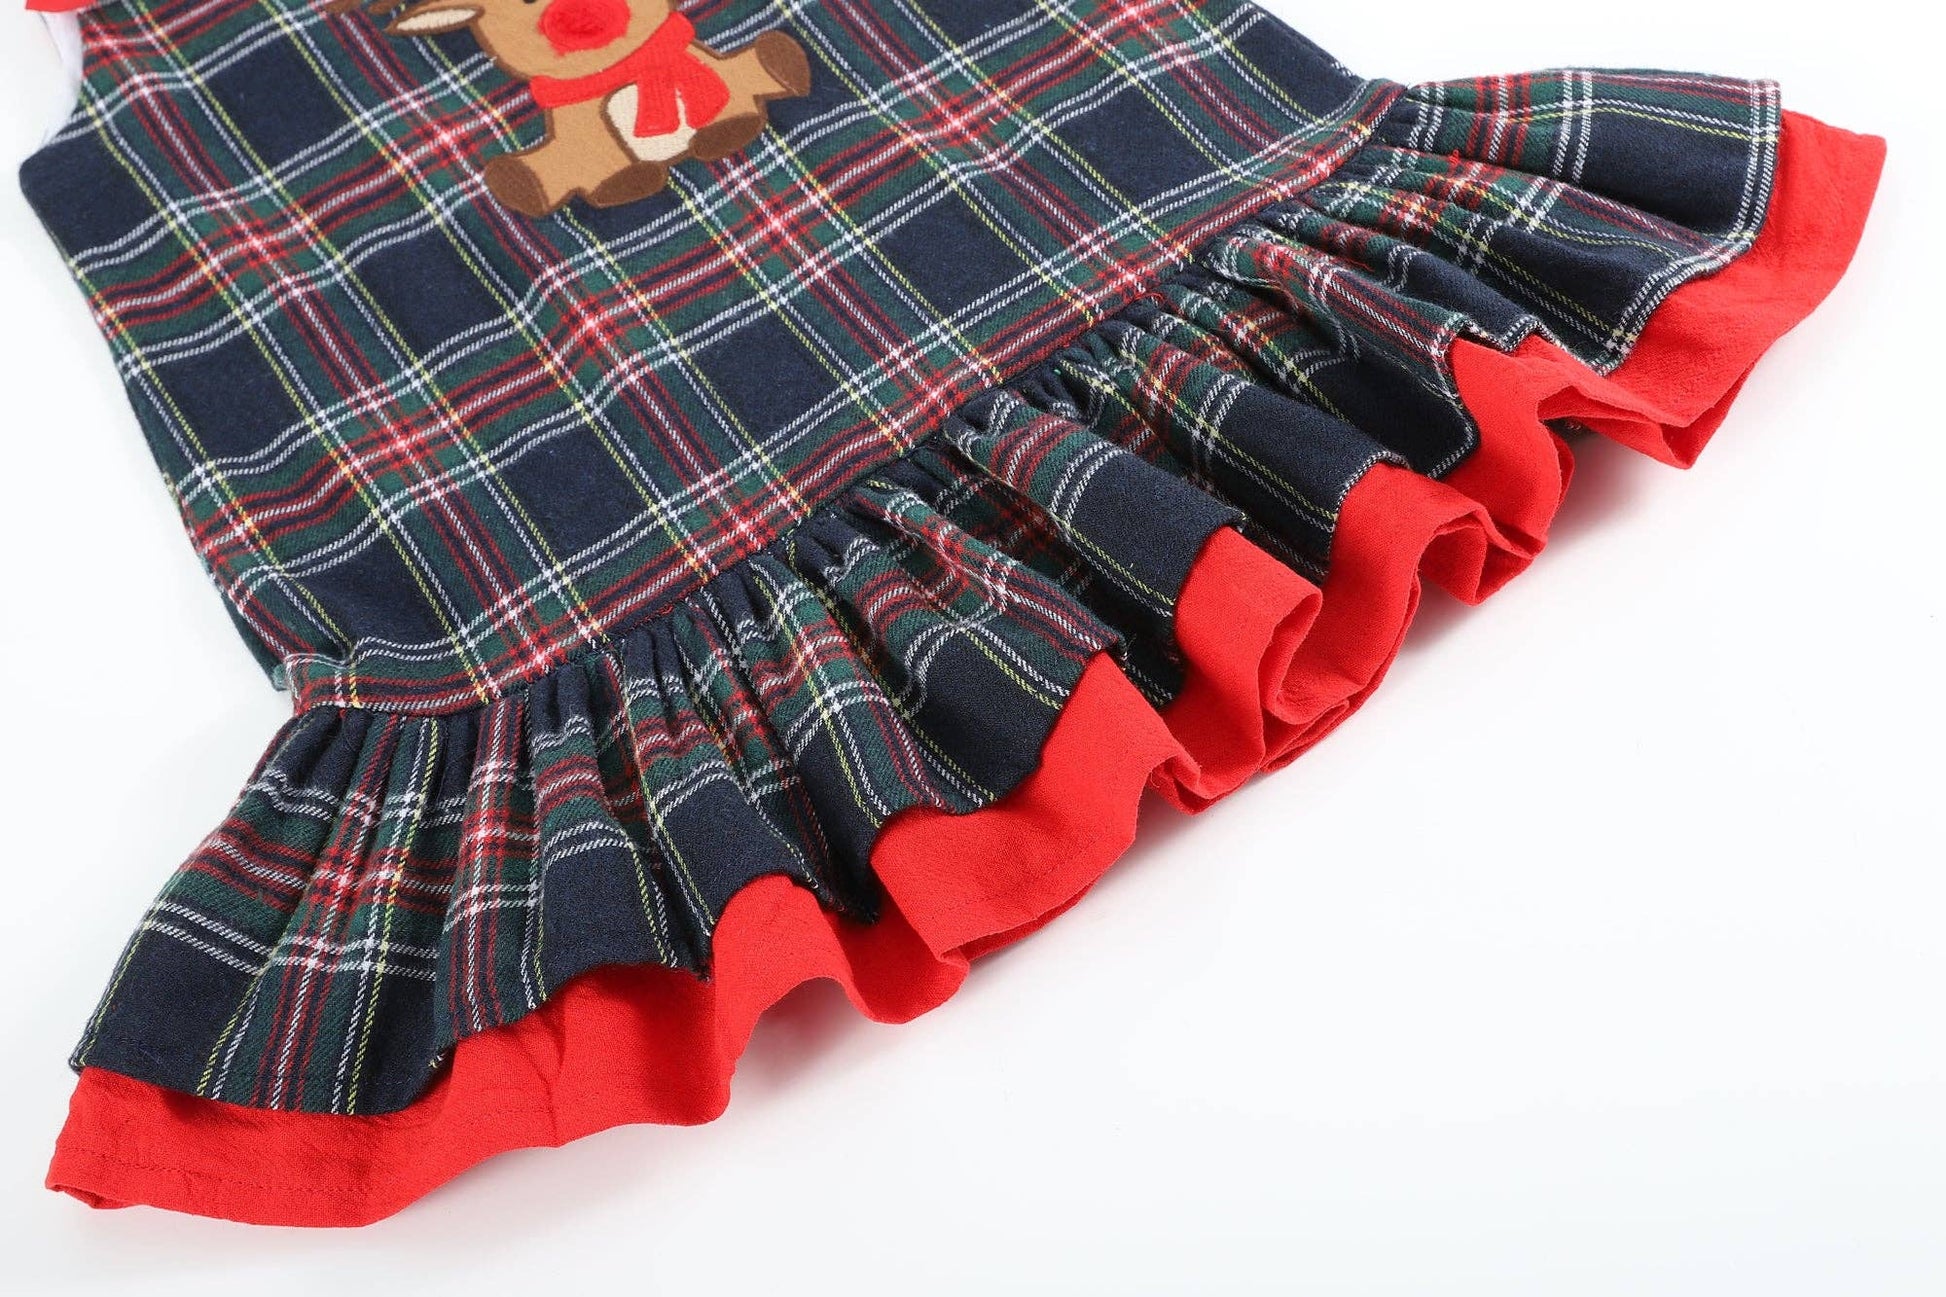 A Navy and Red Plaid Reindeer Ruffle Dress by Lil Cactus, perfect for holiday fun.